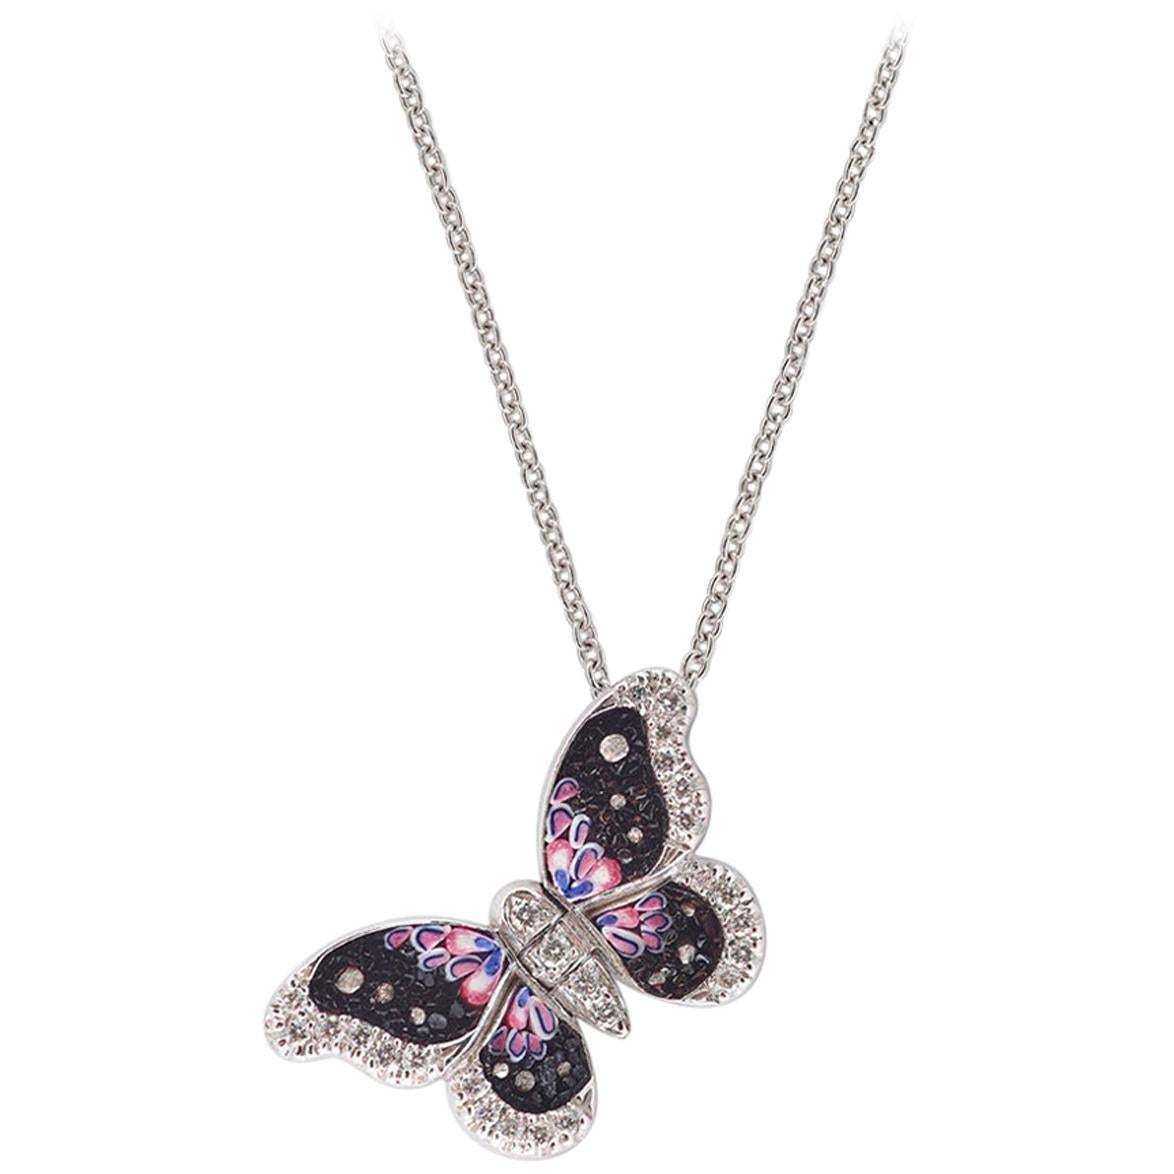 Stylish Necklace White Gold White Diamonds Hand Decorated with Micro Mosaic